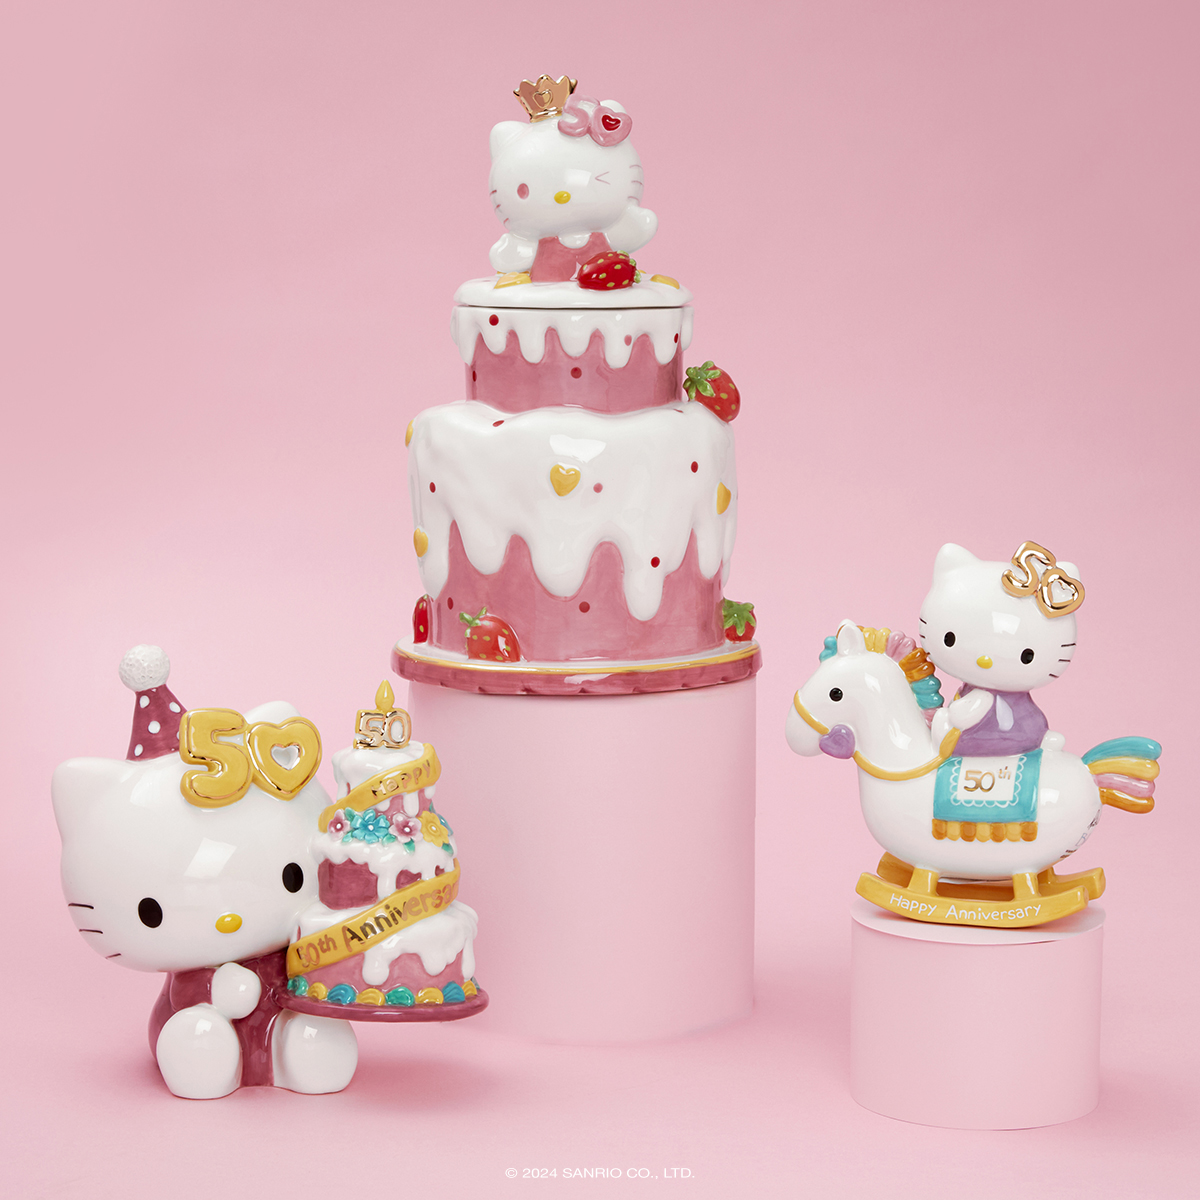 Timeless cuteness 💖 Add to your #HelloKitty50th collection with functional and supercute ceramics! Shop now: sanrio.com/collections/ne…